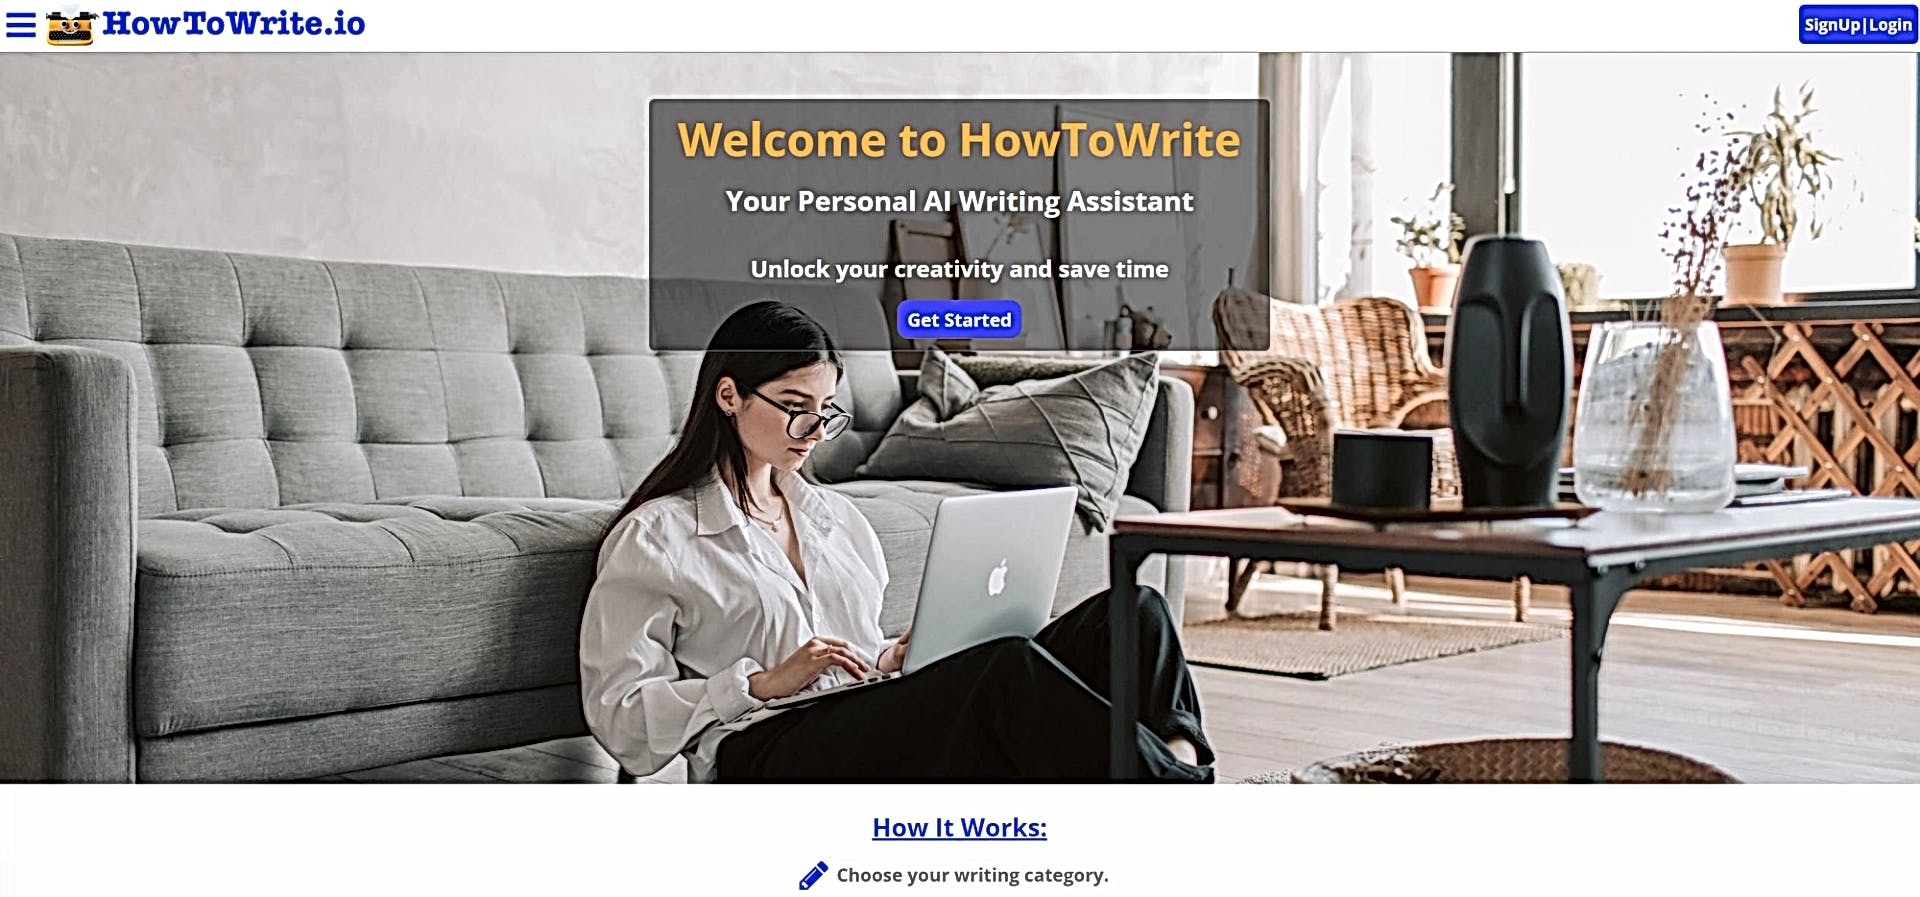 HowToWrite featured